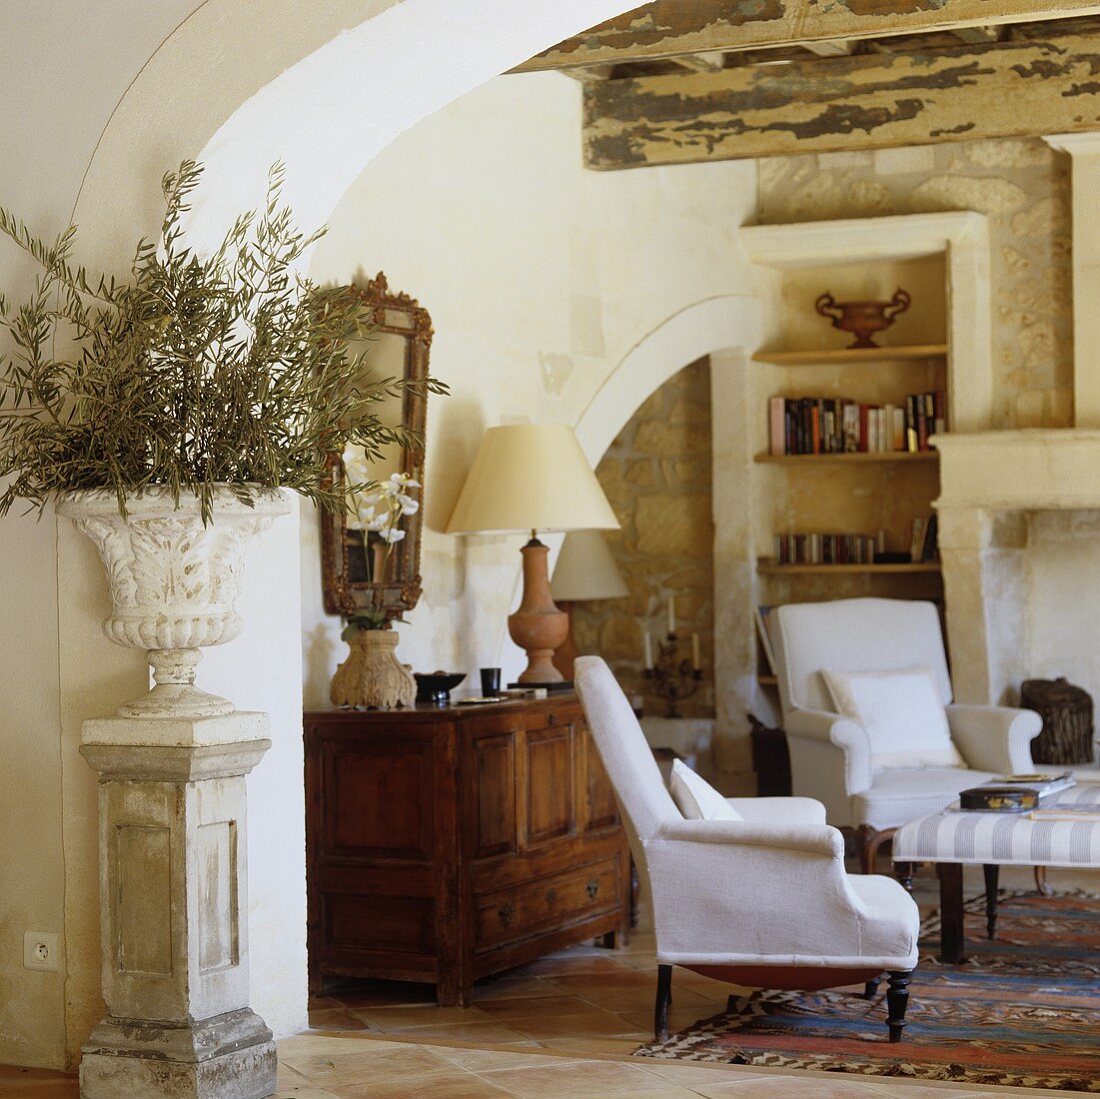 A view through a round archway into a corner of a rustic living room with white armchairs in front of a wooden sideboard